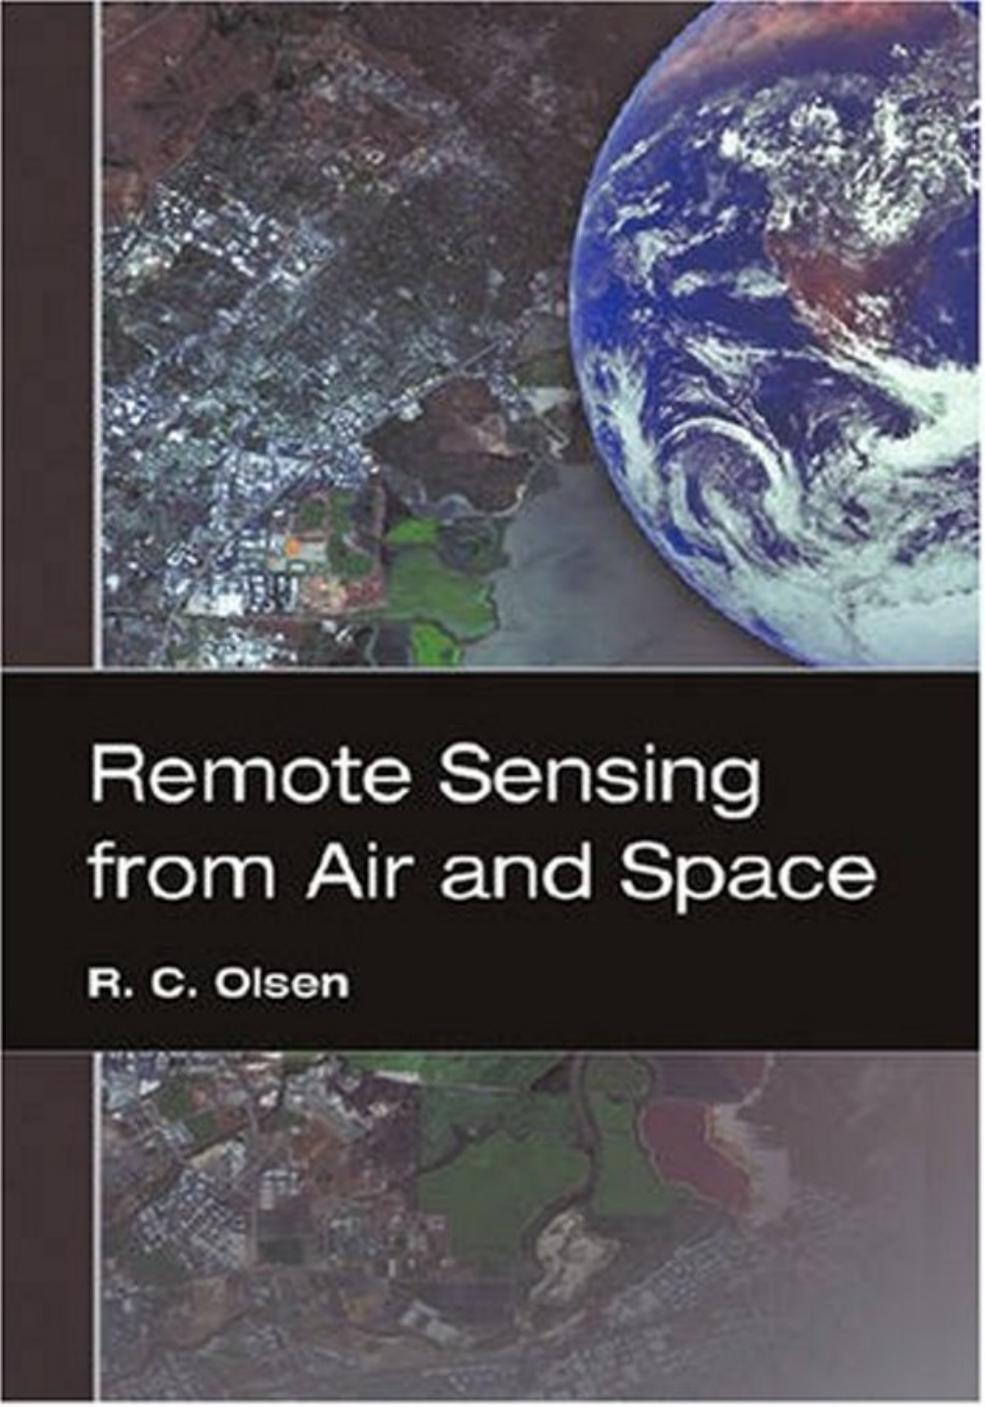 Remote Sensing From Air and Space. 2007